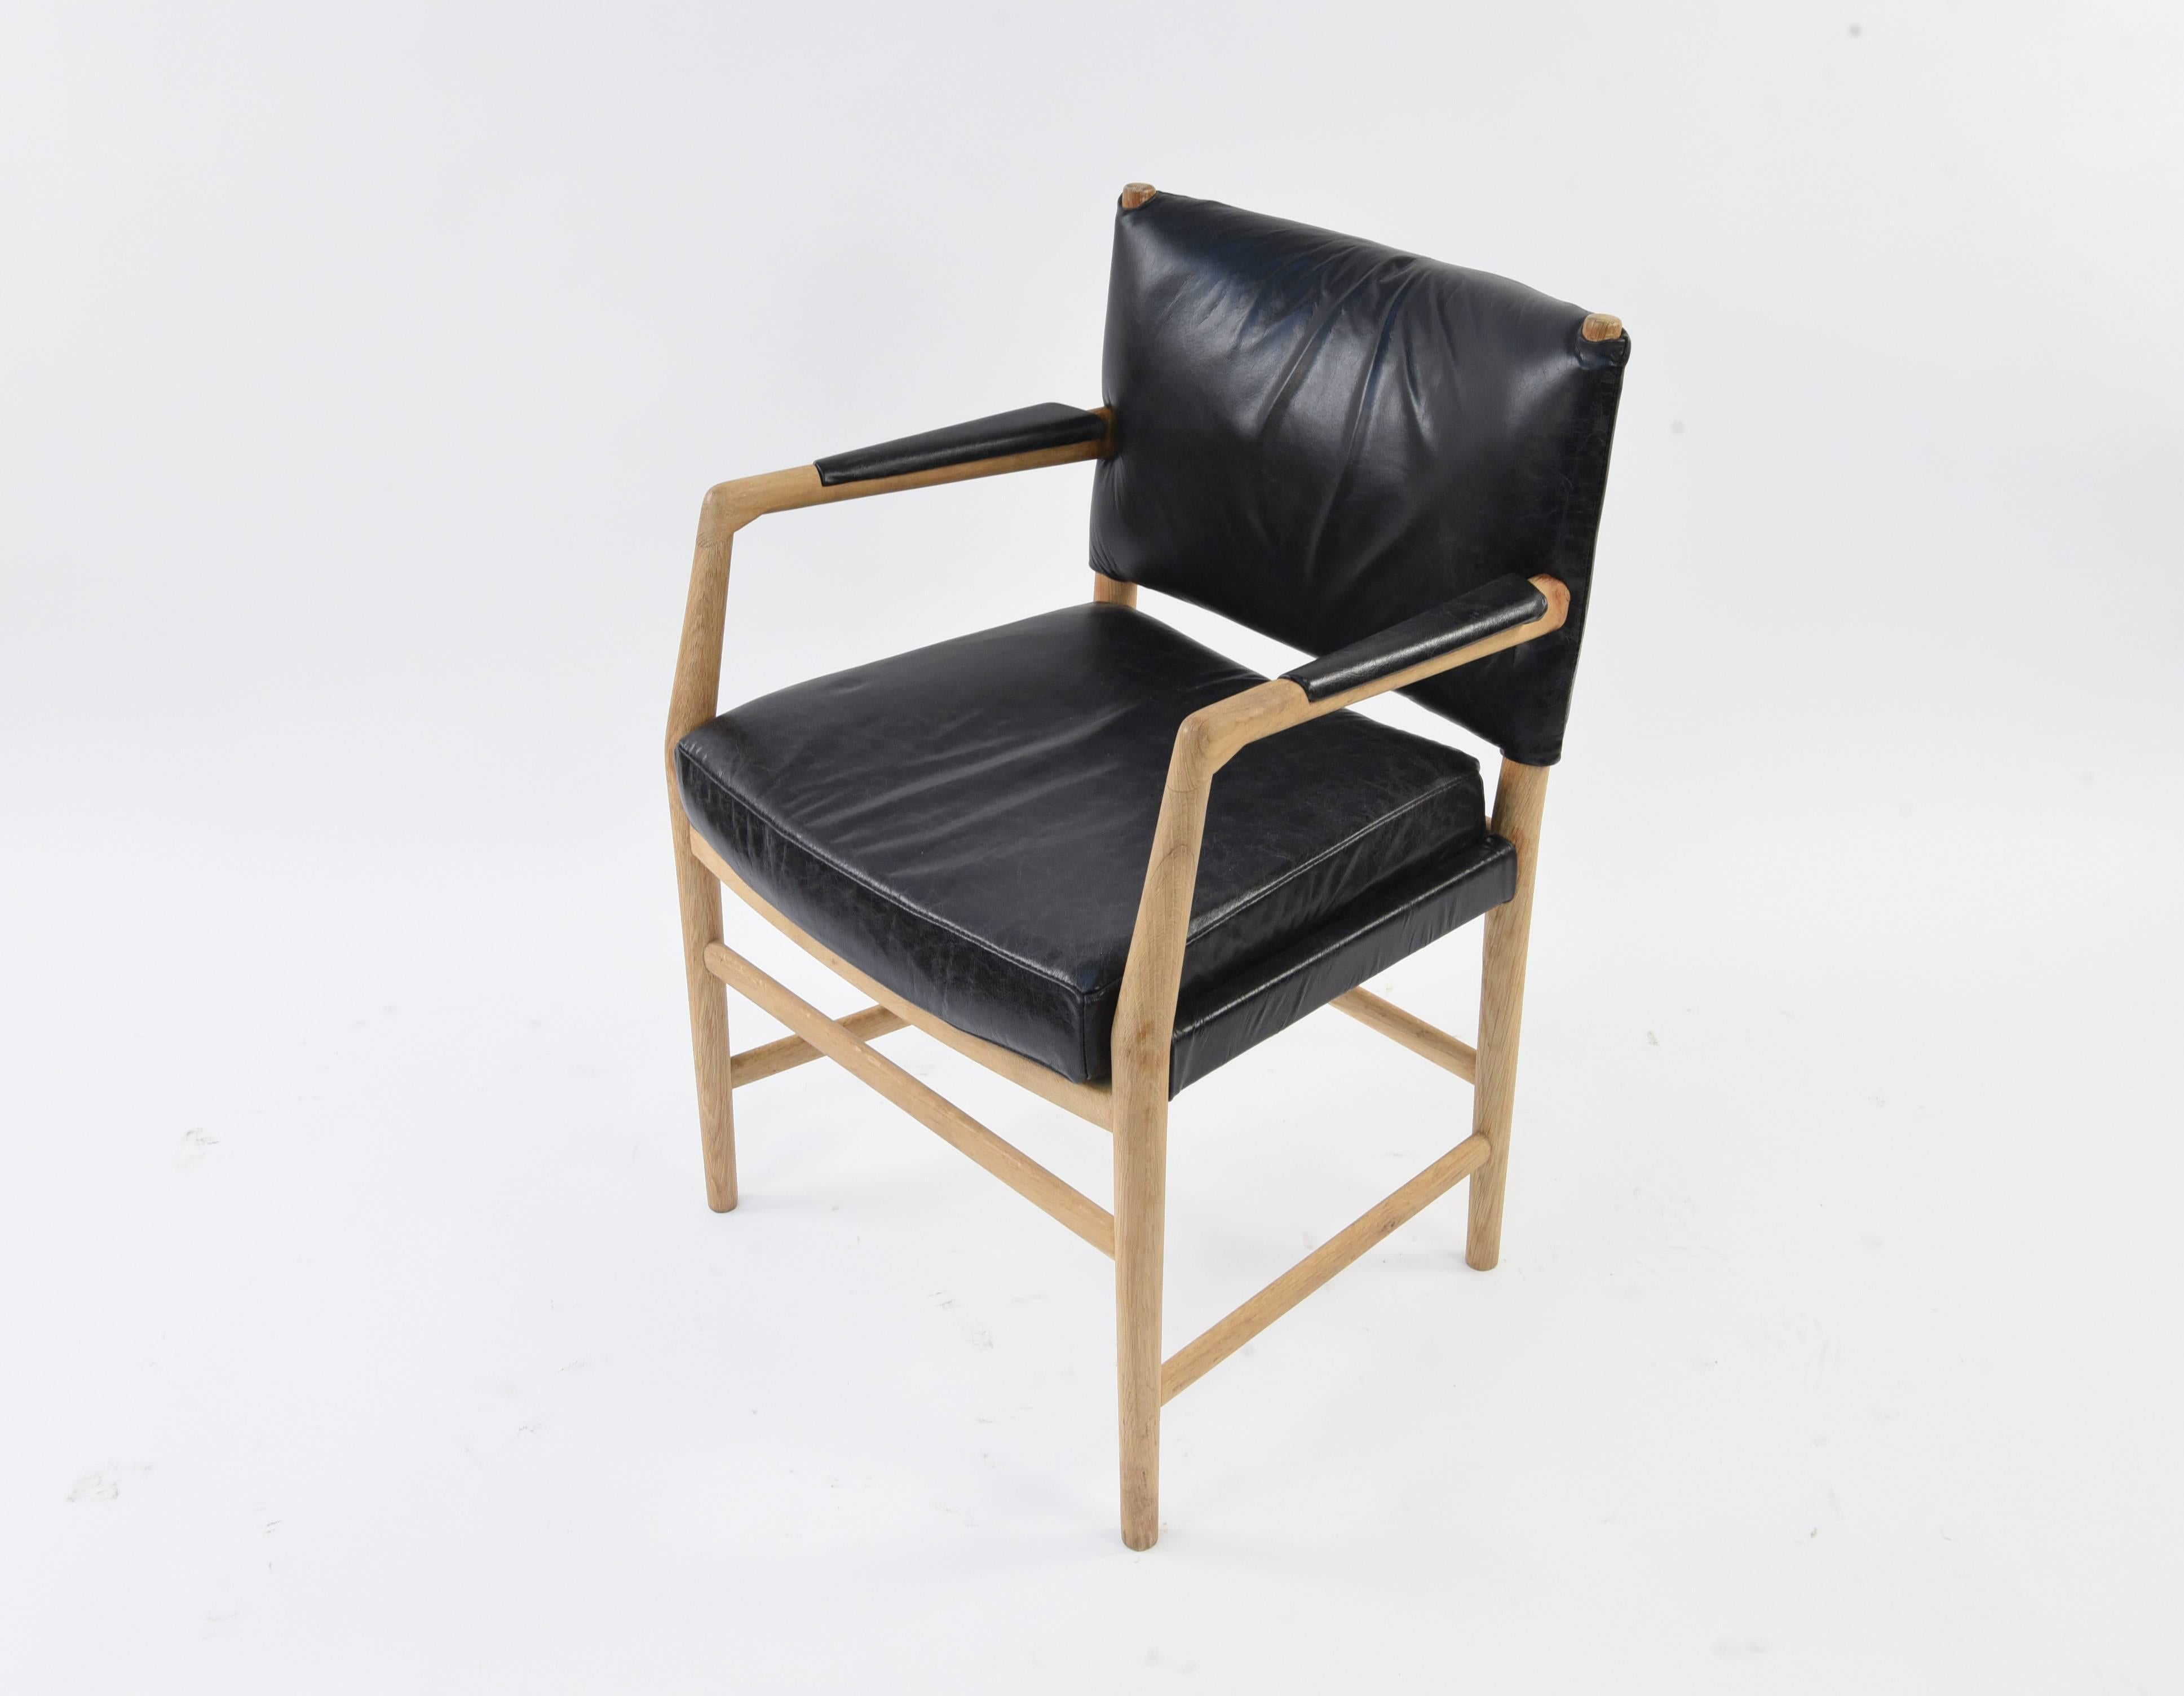 'Aarhus city hall chair', in oak and leather, by Hans J. Wegner for Plan Møbler, Denmark, 1942. Designed for the Aarhus city hall in Denmark. Wonderful design with black leather upholstery on the seats and back, with great detail of upholstered arms.